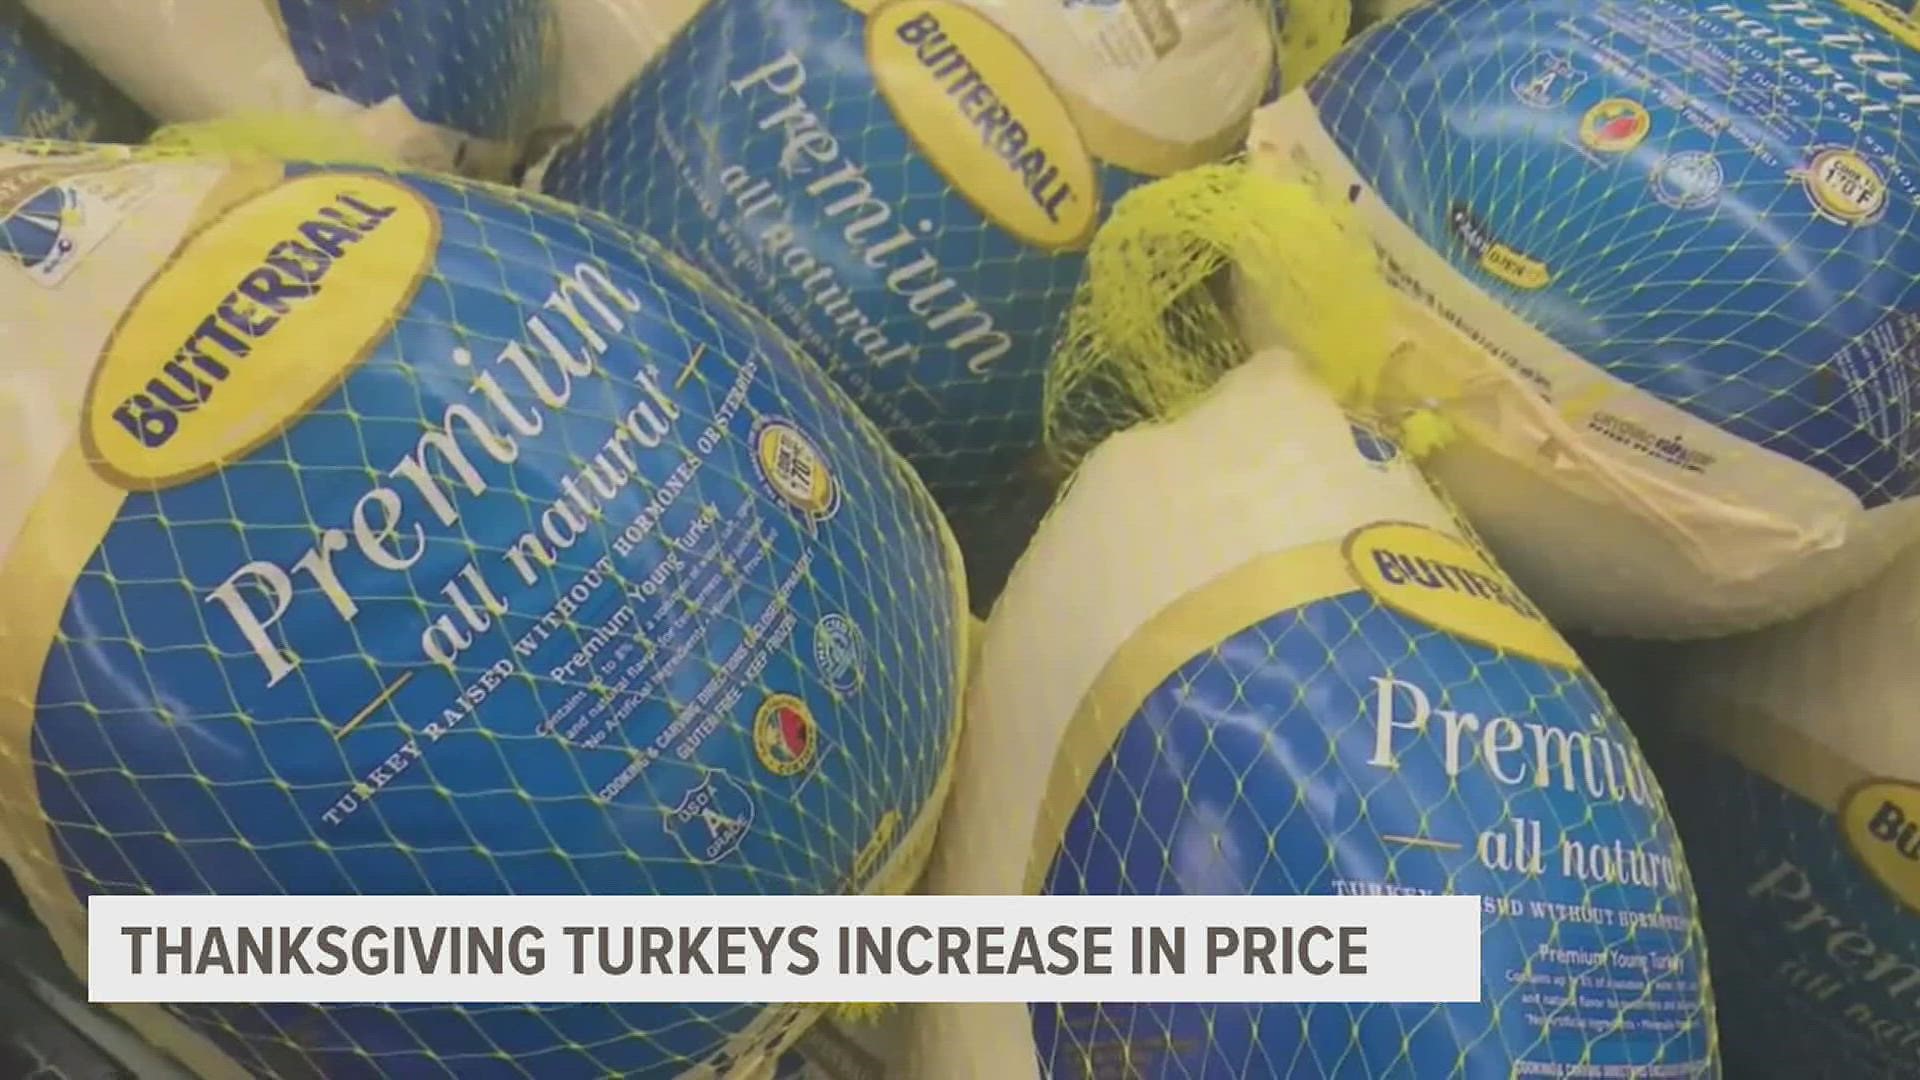 According to the USDA, the cost of a whole turkey is up 23% from last year, and bone-in breast turkeys are up 33%.